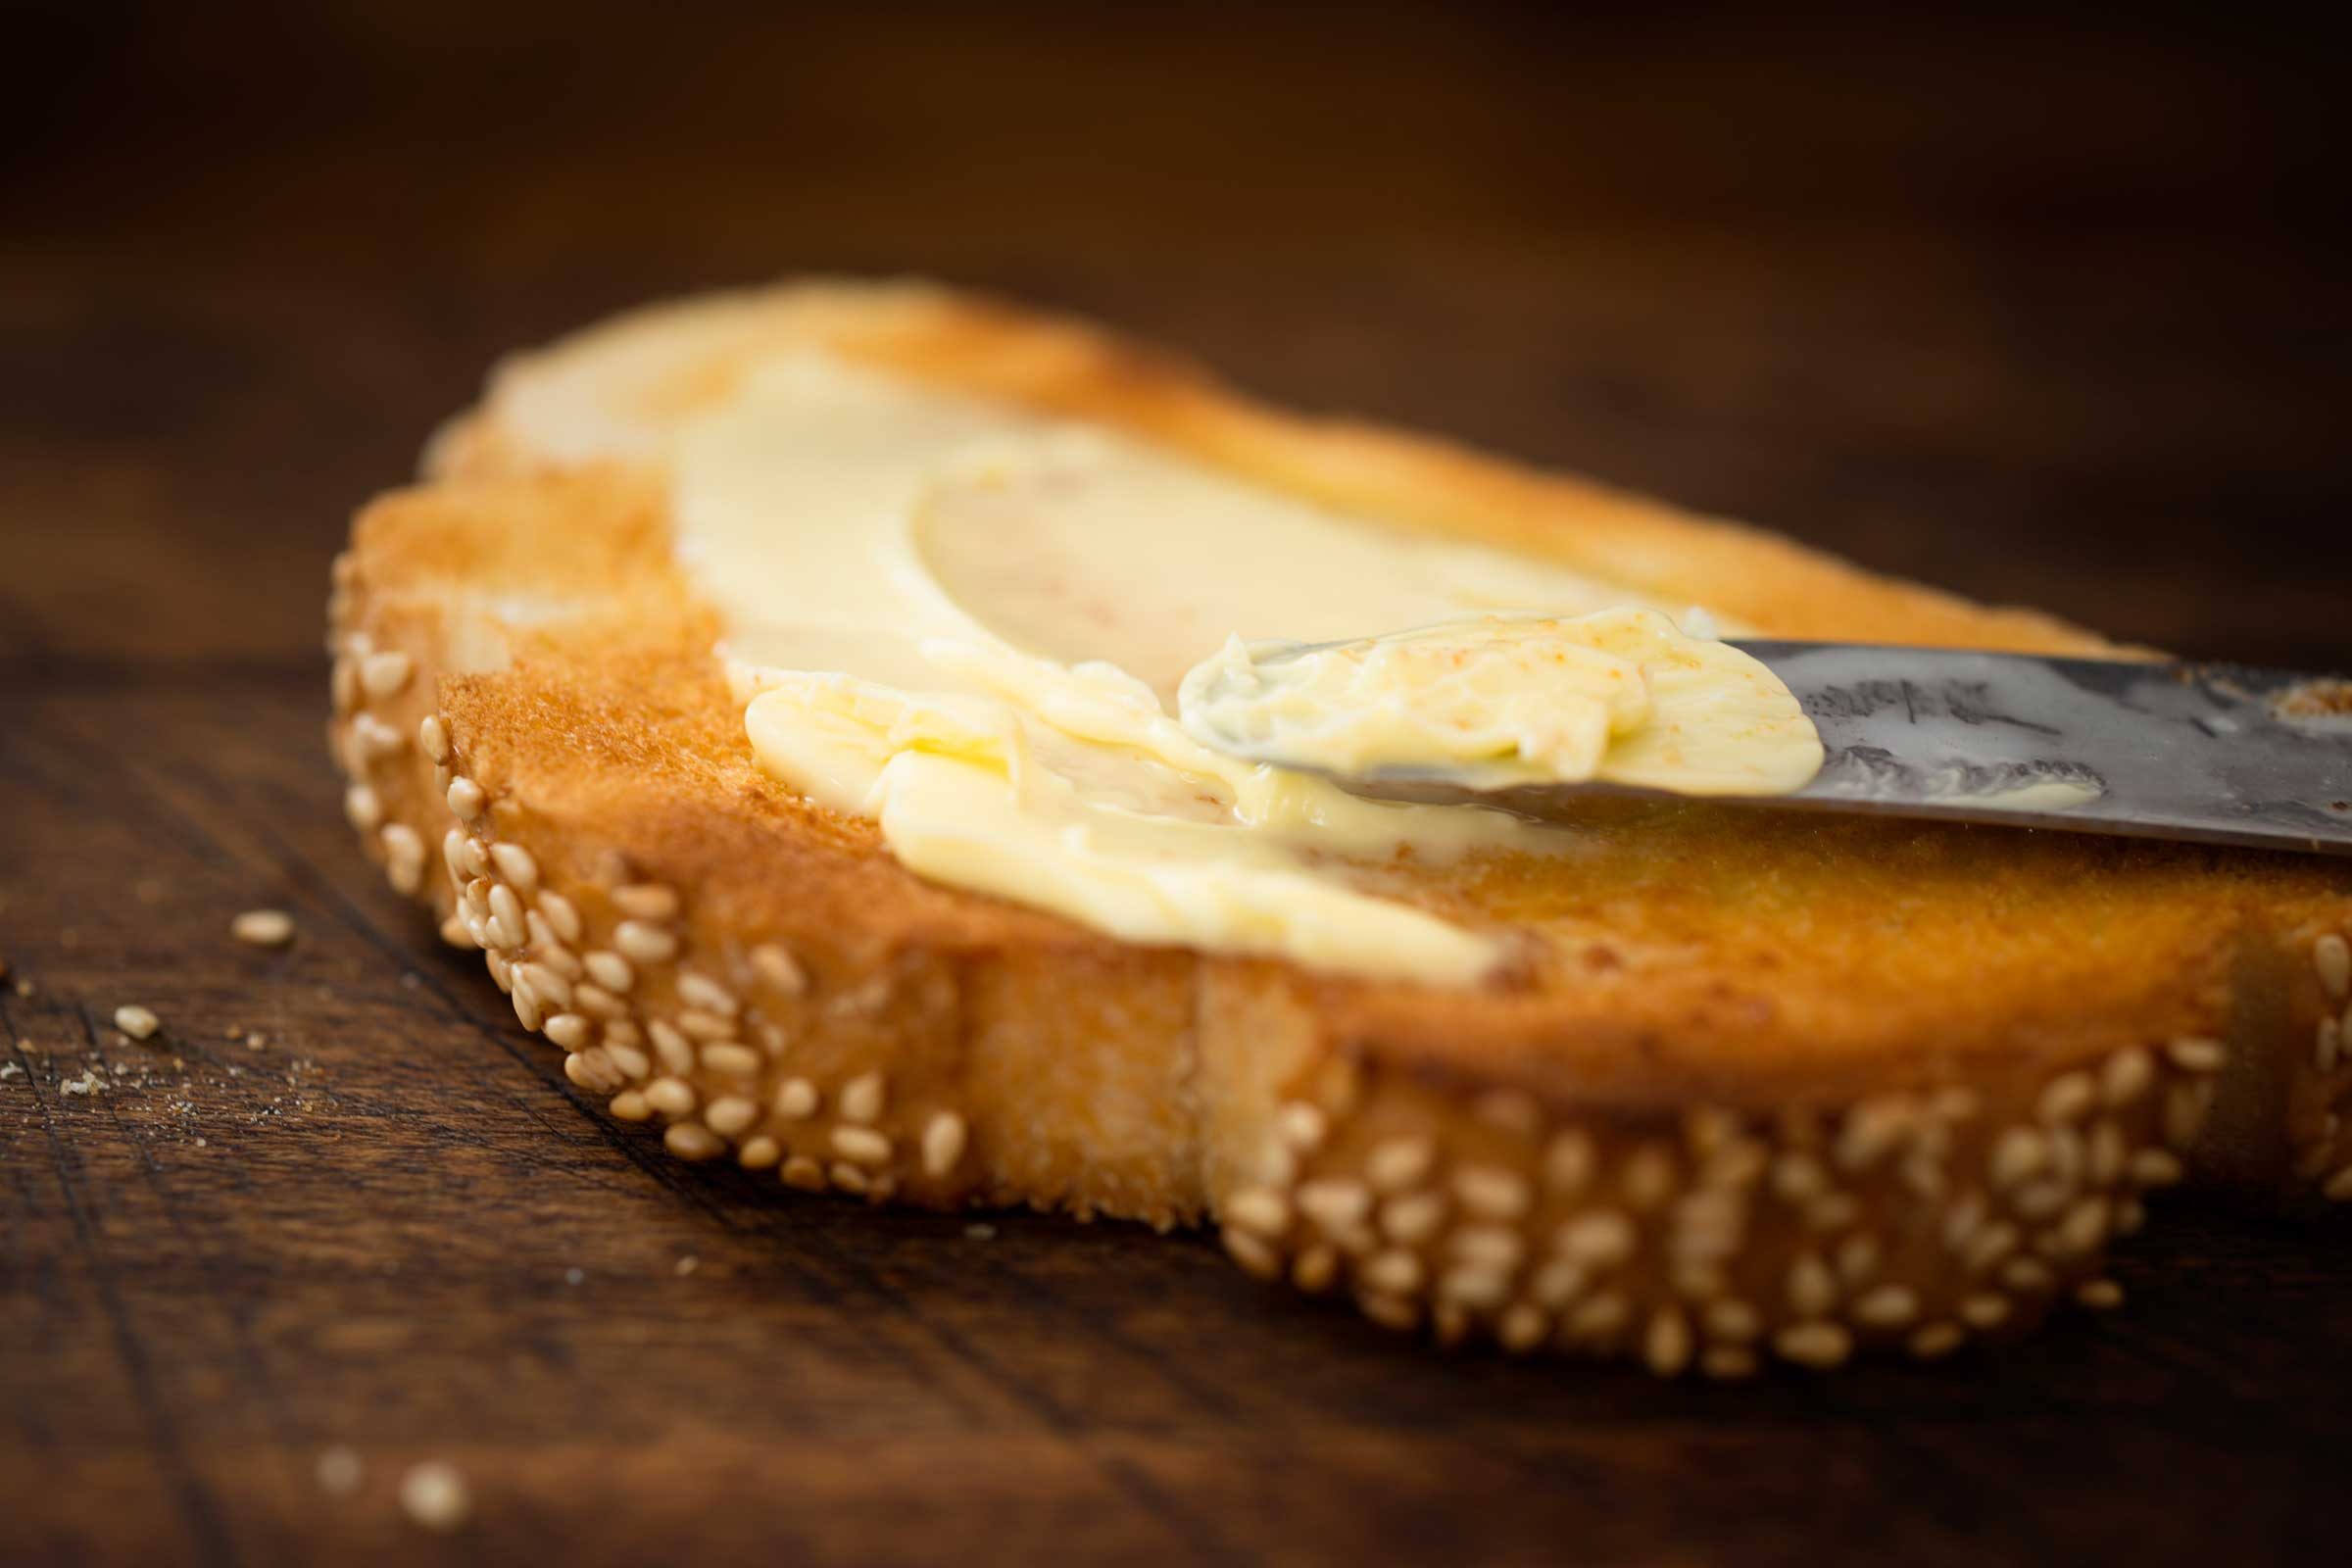 What happens when you eat rancid butter?